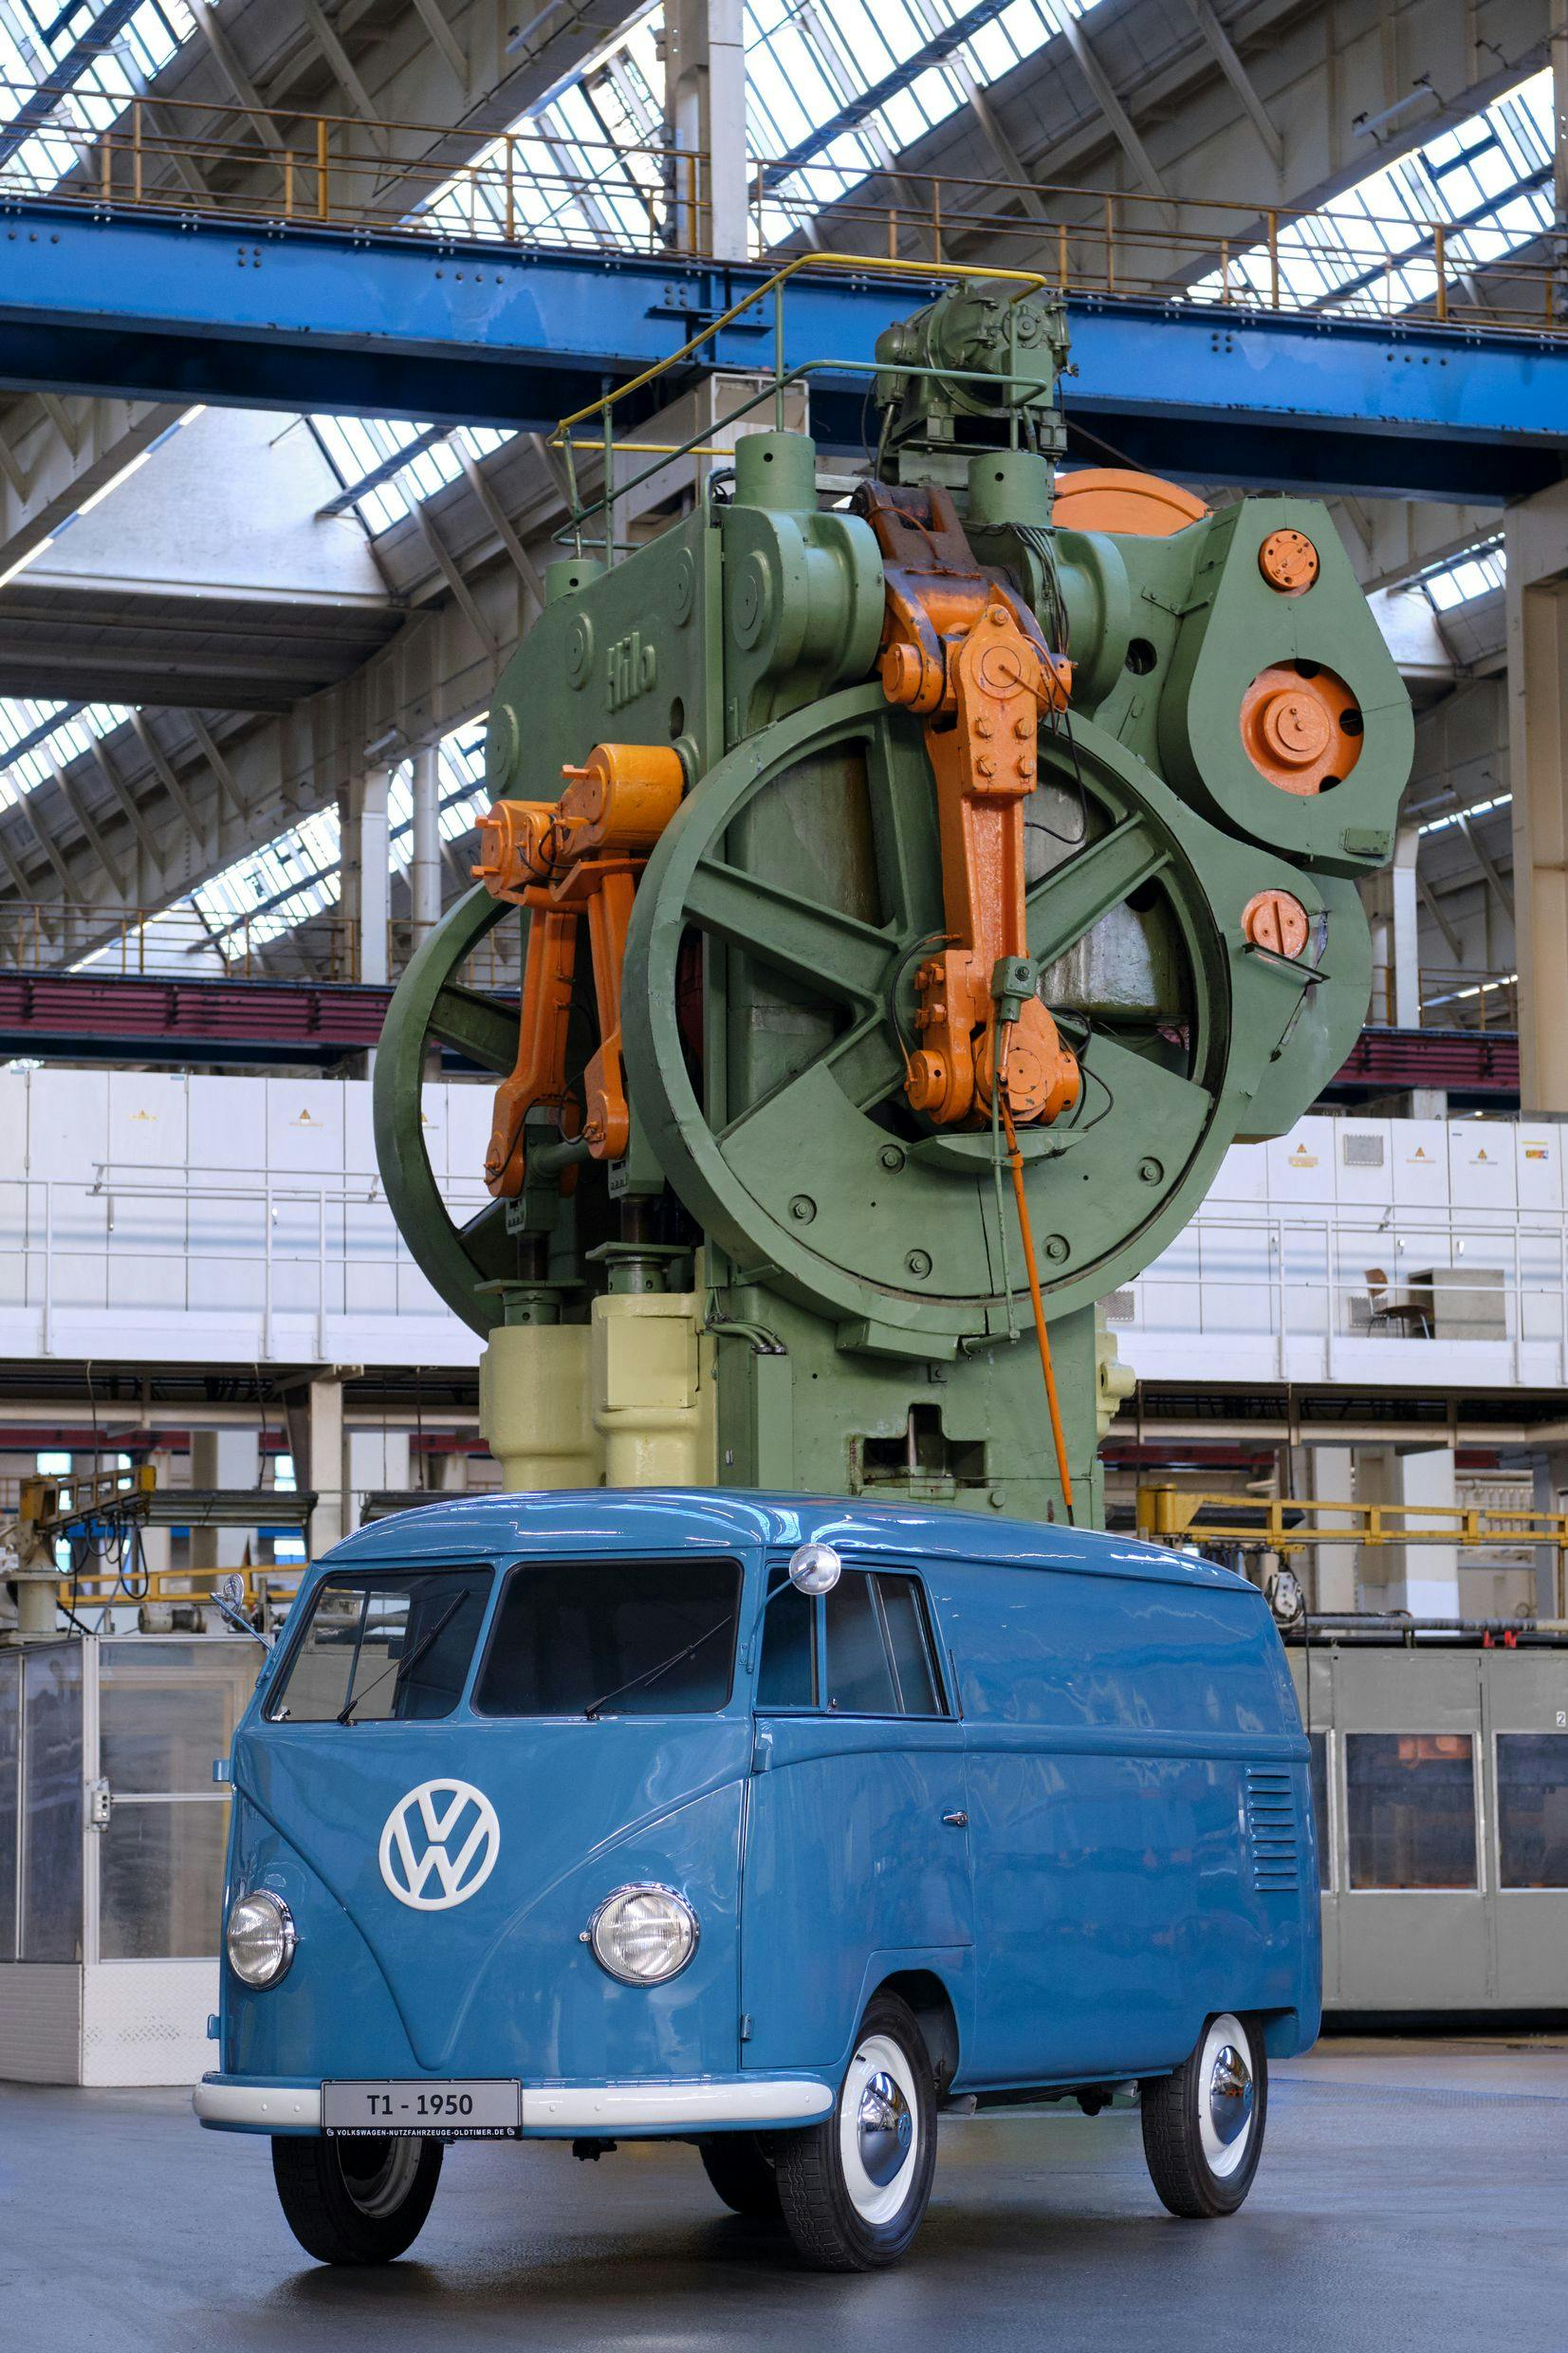 1950 VW T2 - Oldest - Industrial setting